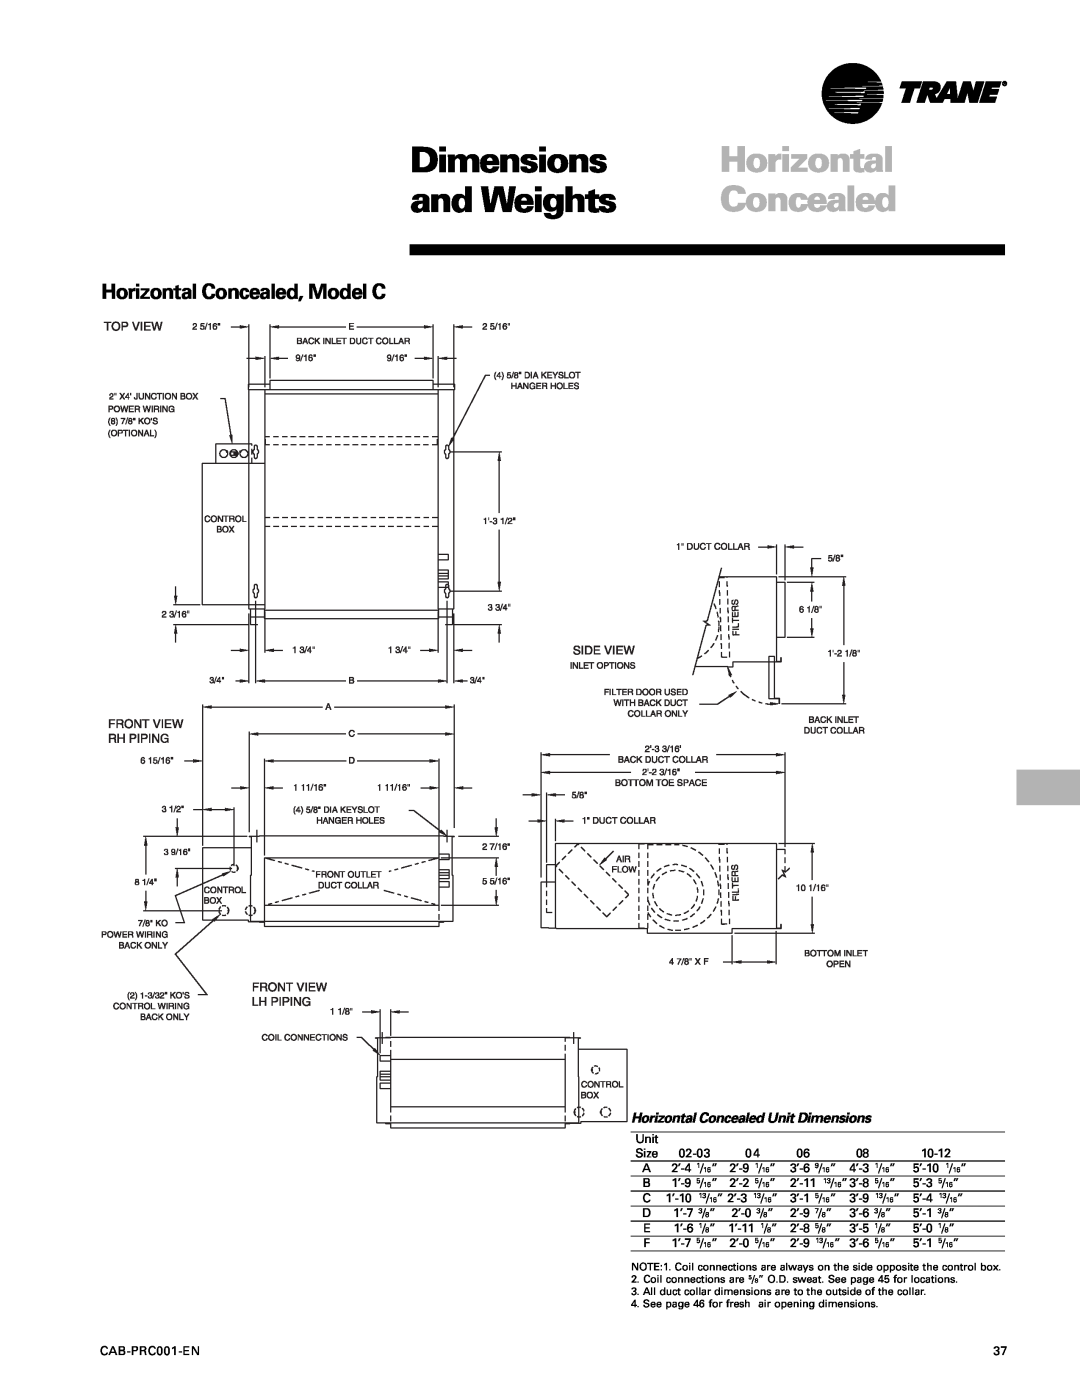 Trane CAB-PRC001-EN manual Dimensions, and Weights, Horizontal Concealed, Model C 